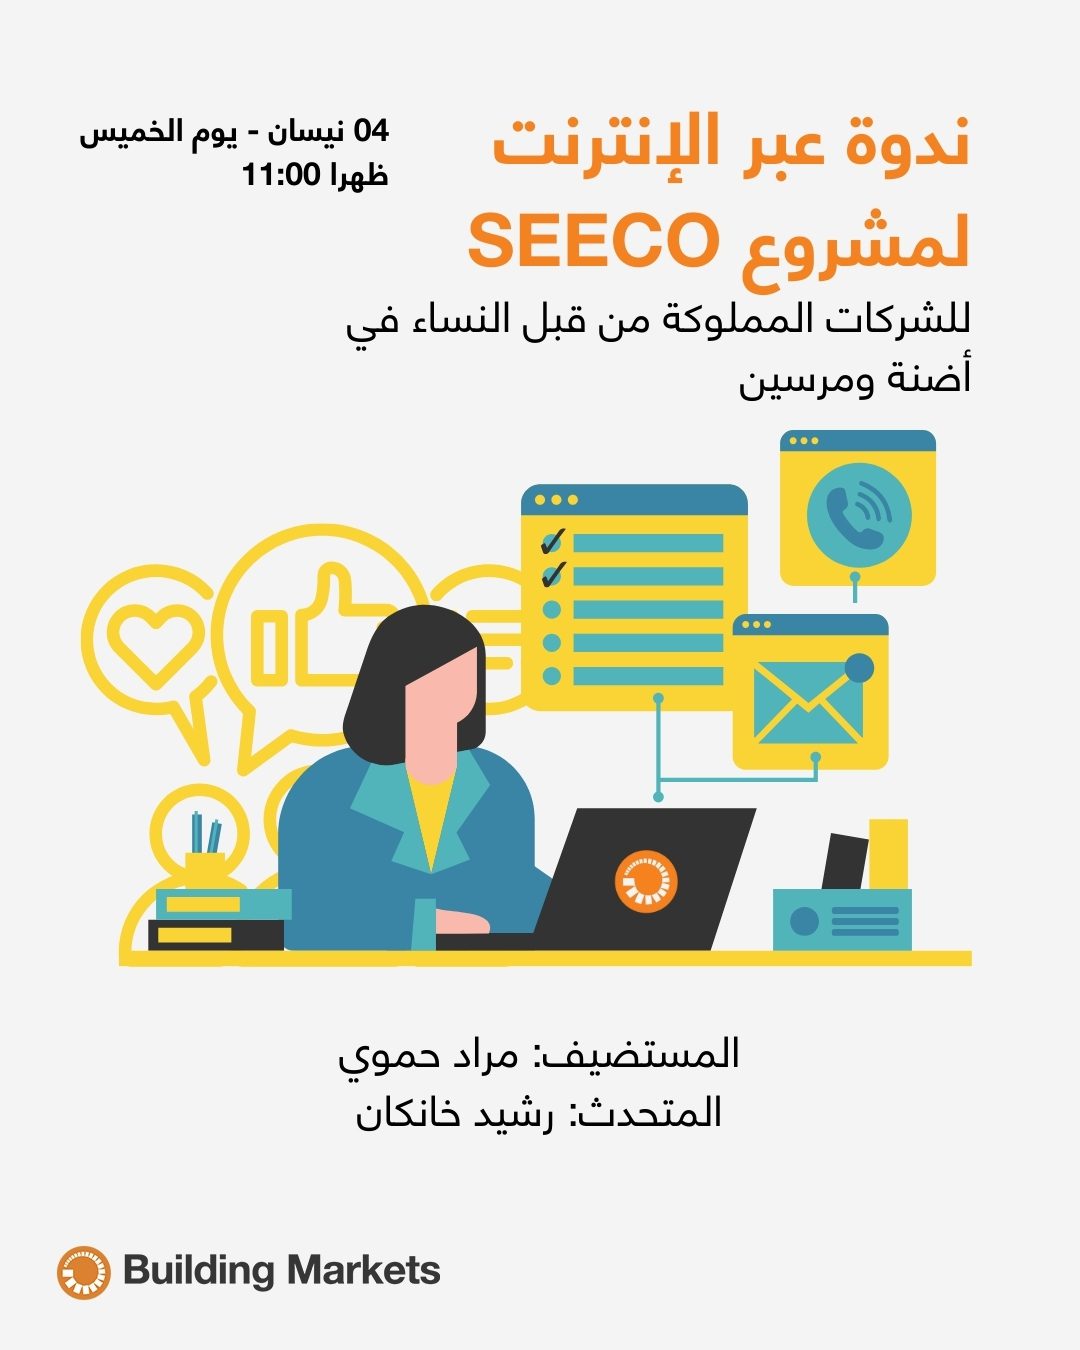 SEECO Project Webinar for Women-owned Businesses